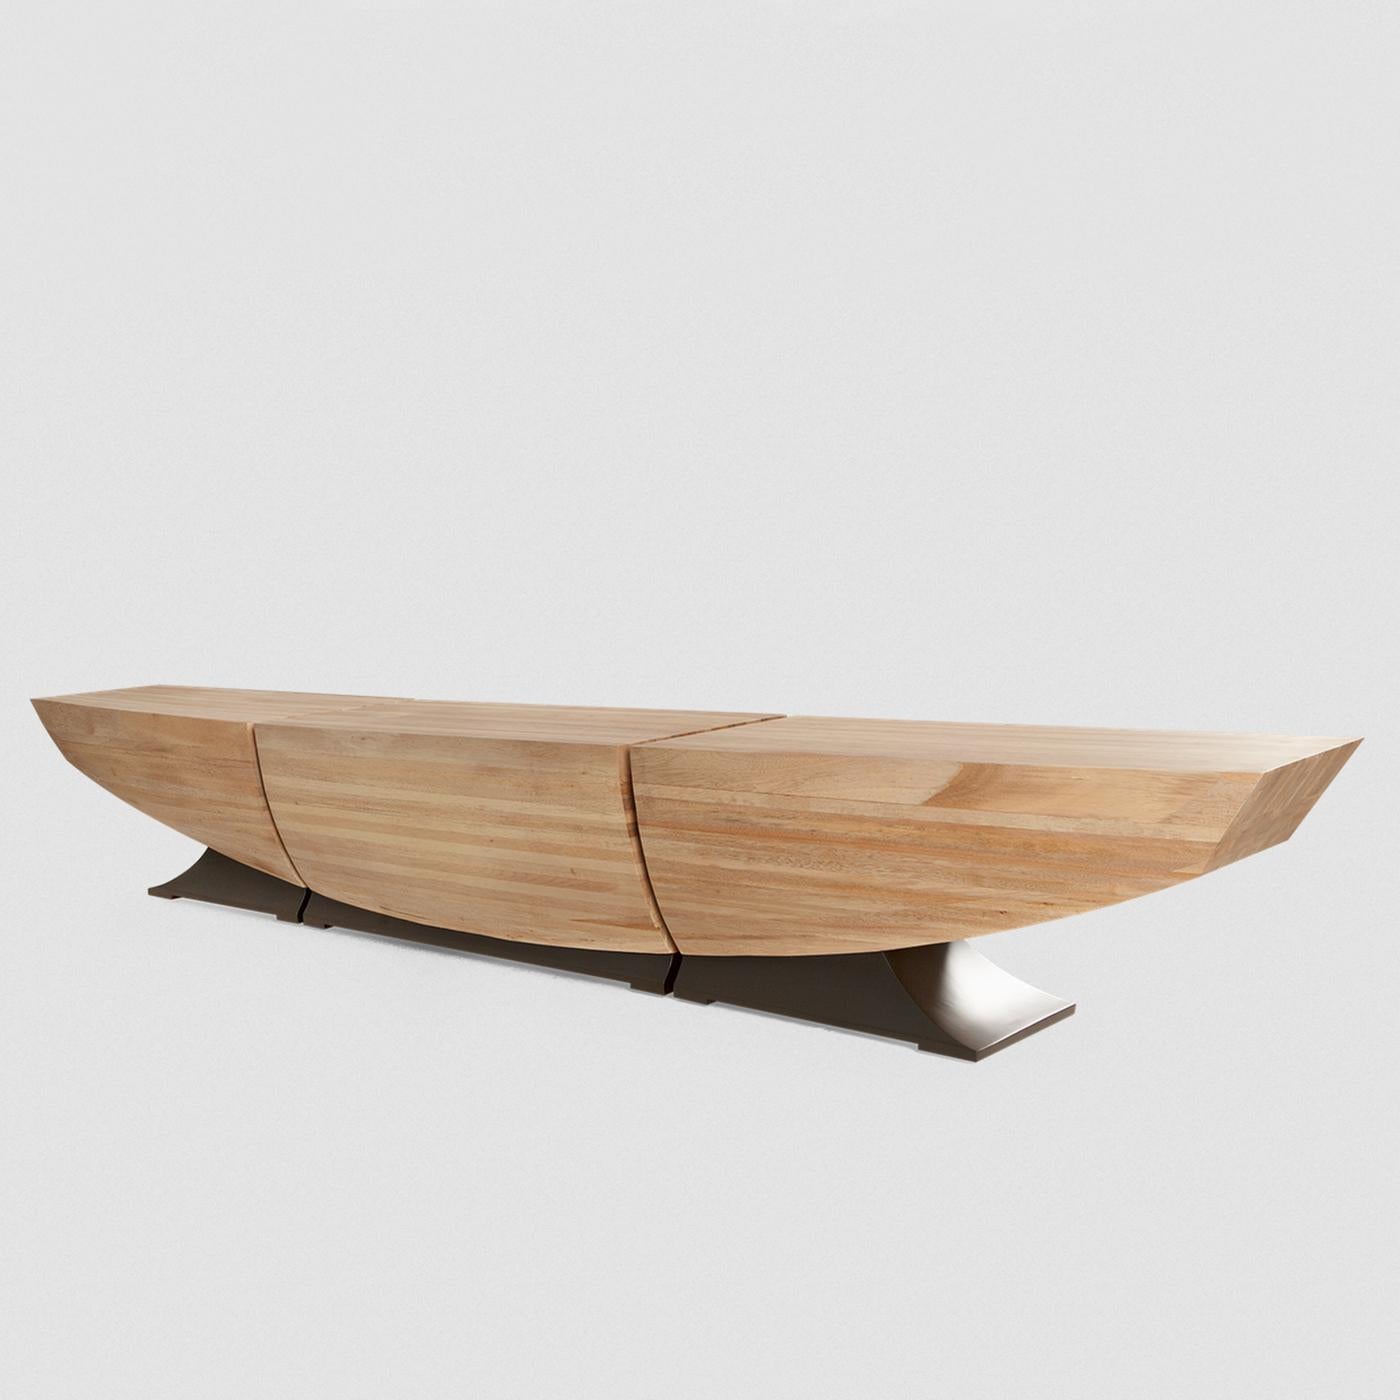 Bench hull all hand-crafted
in solid blond wood. With black
satinated base in solid wood.